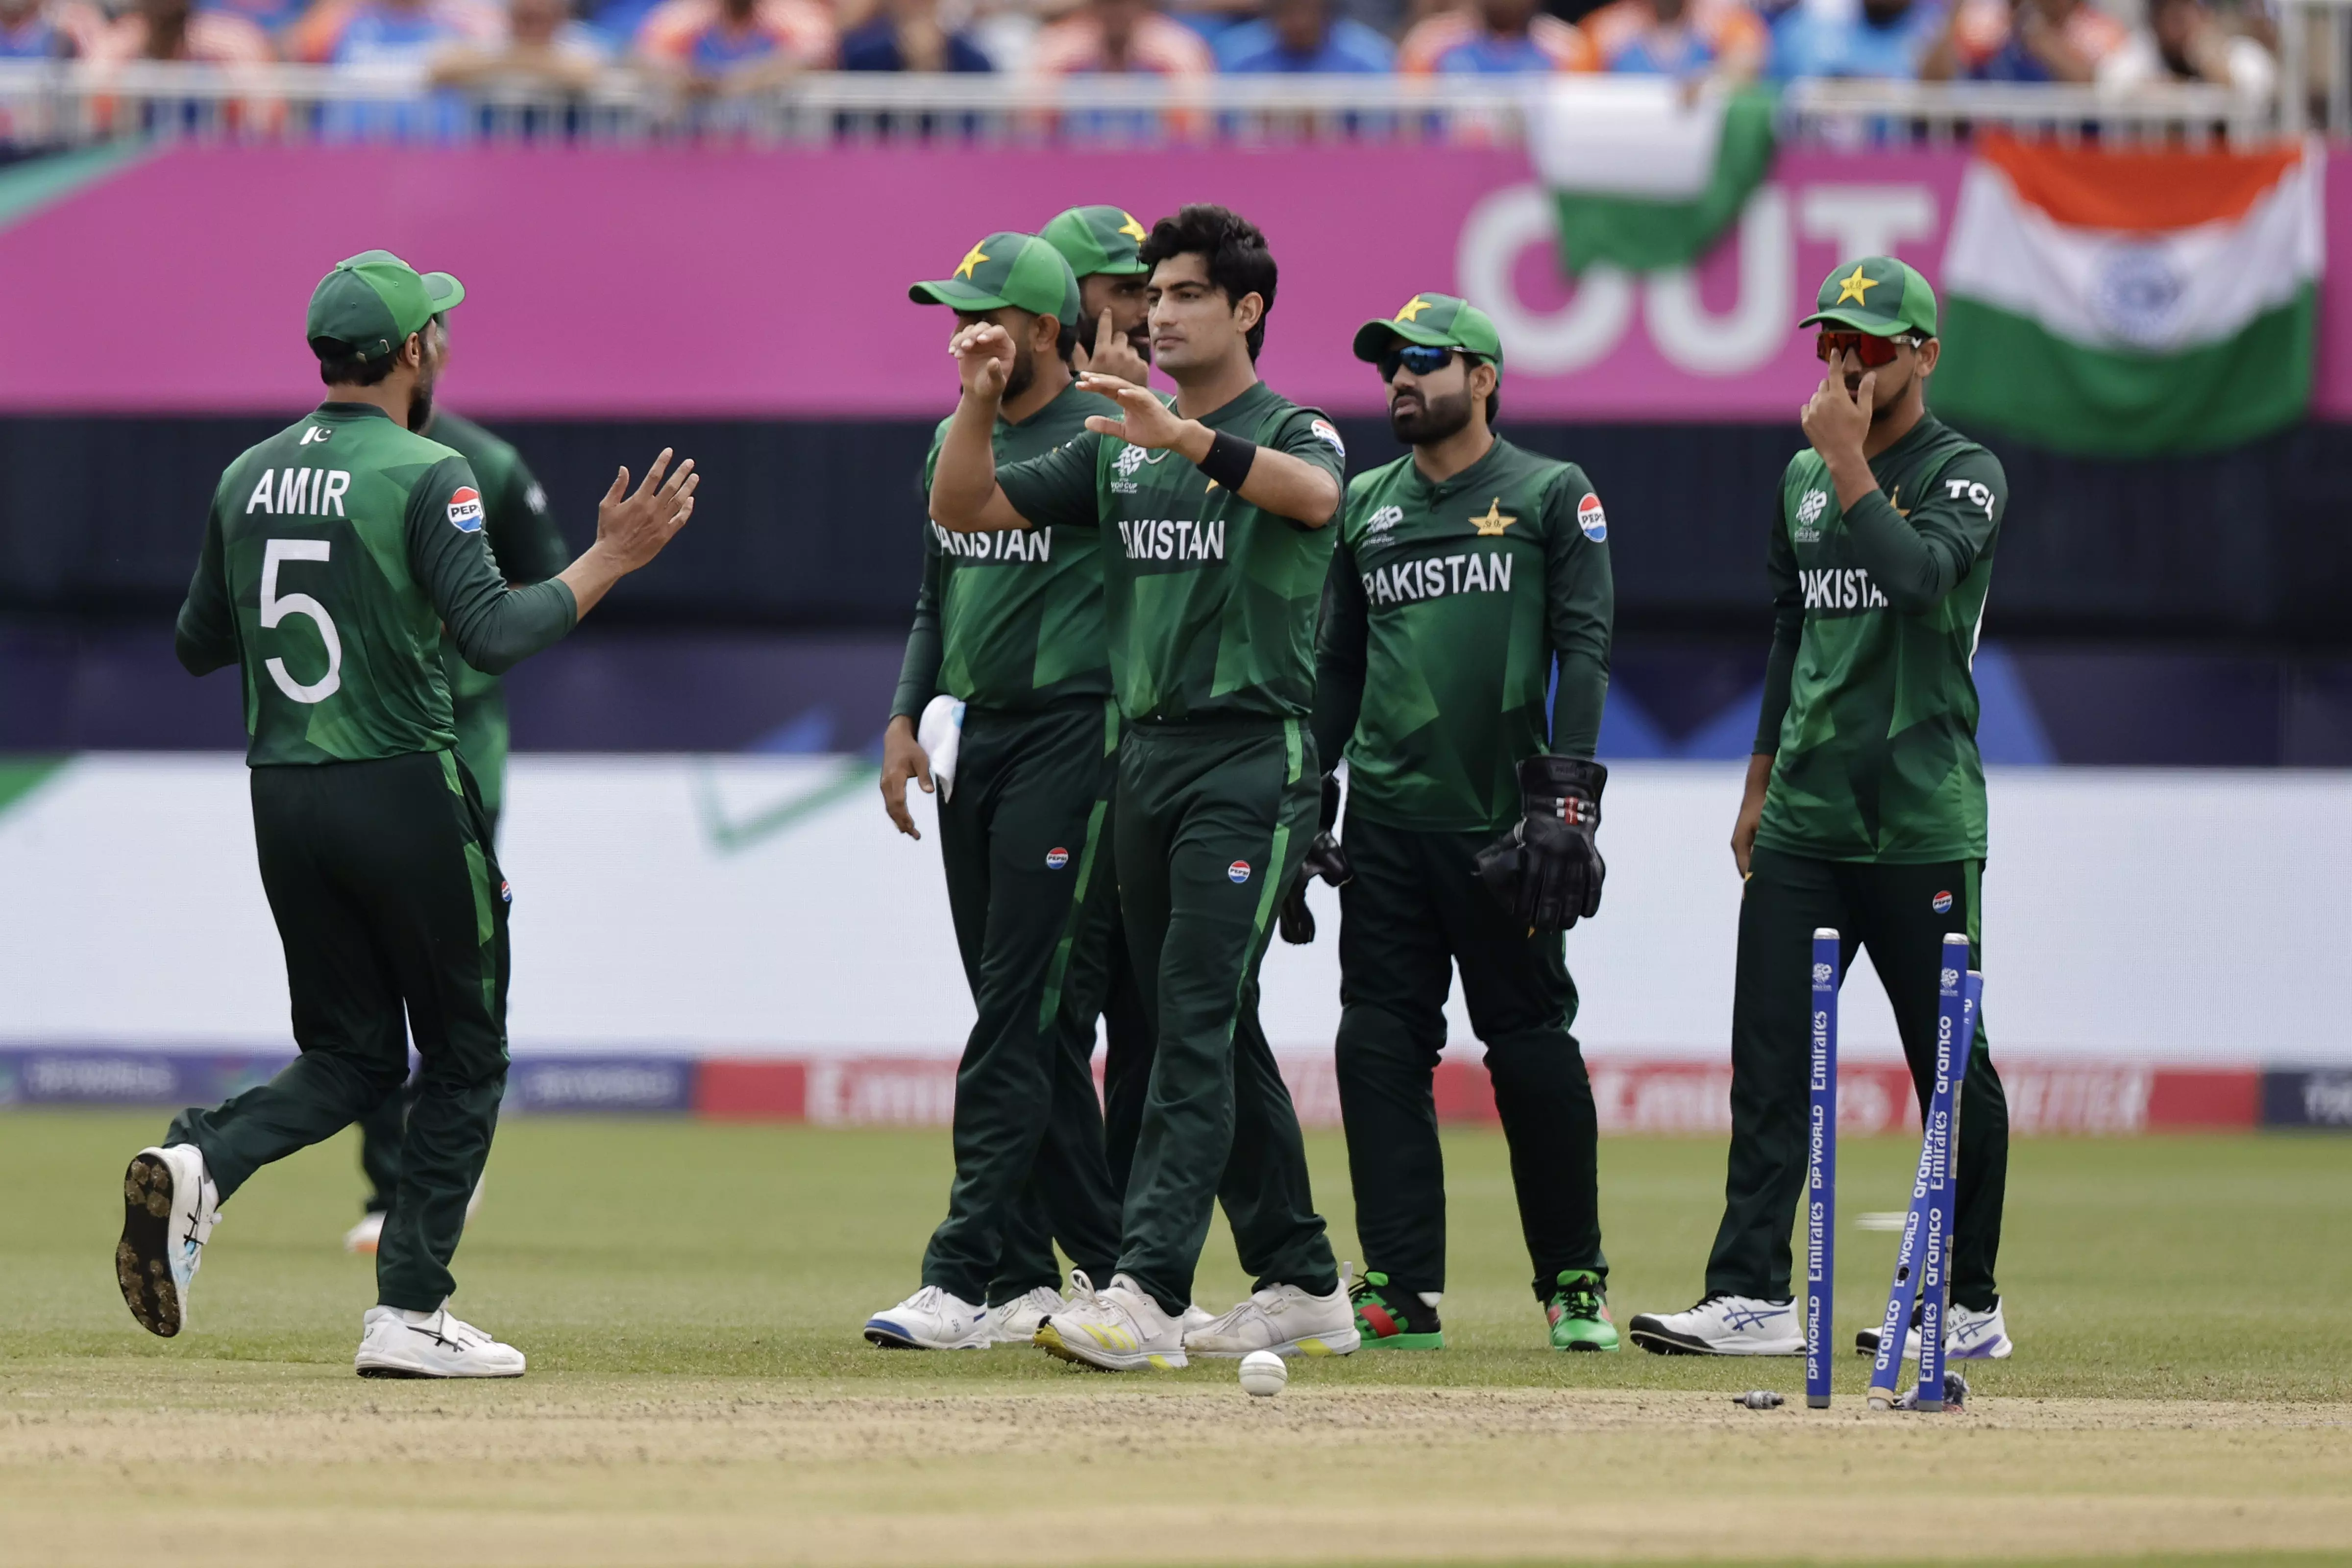 T20 World Cup: How Pakistan can qualify for Super 8 after loss to India